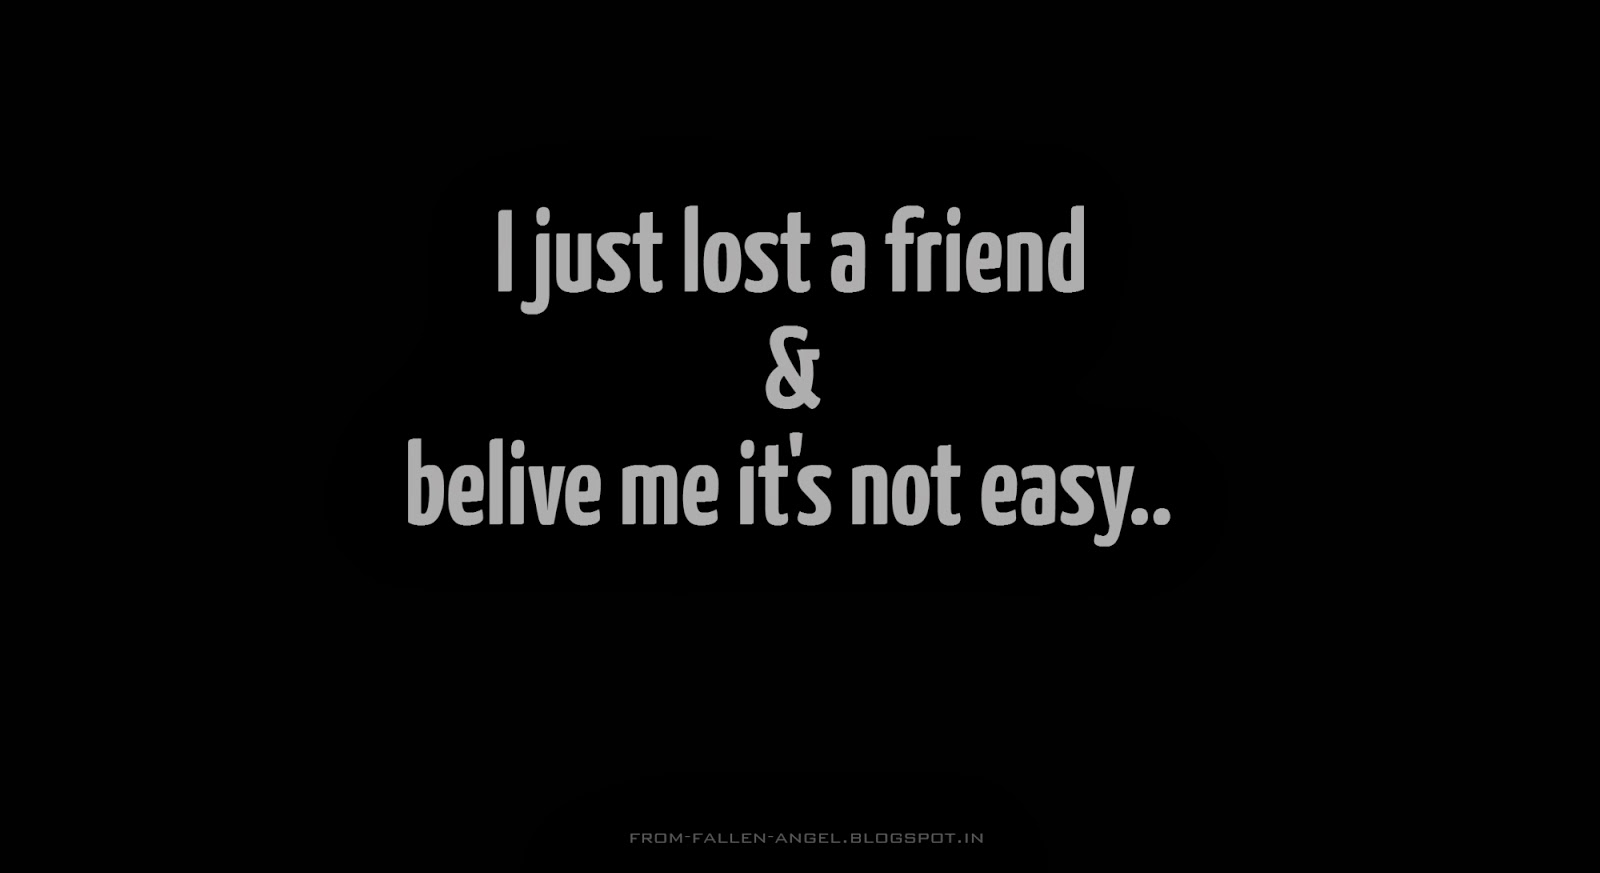 I just lost a friend & belive me it's not easy..